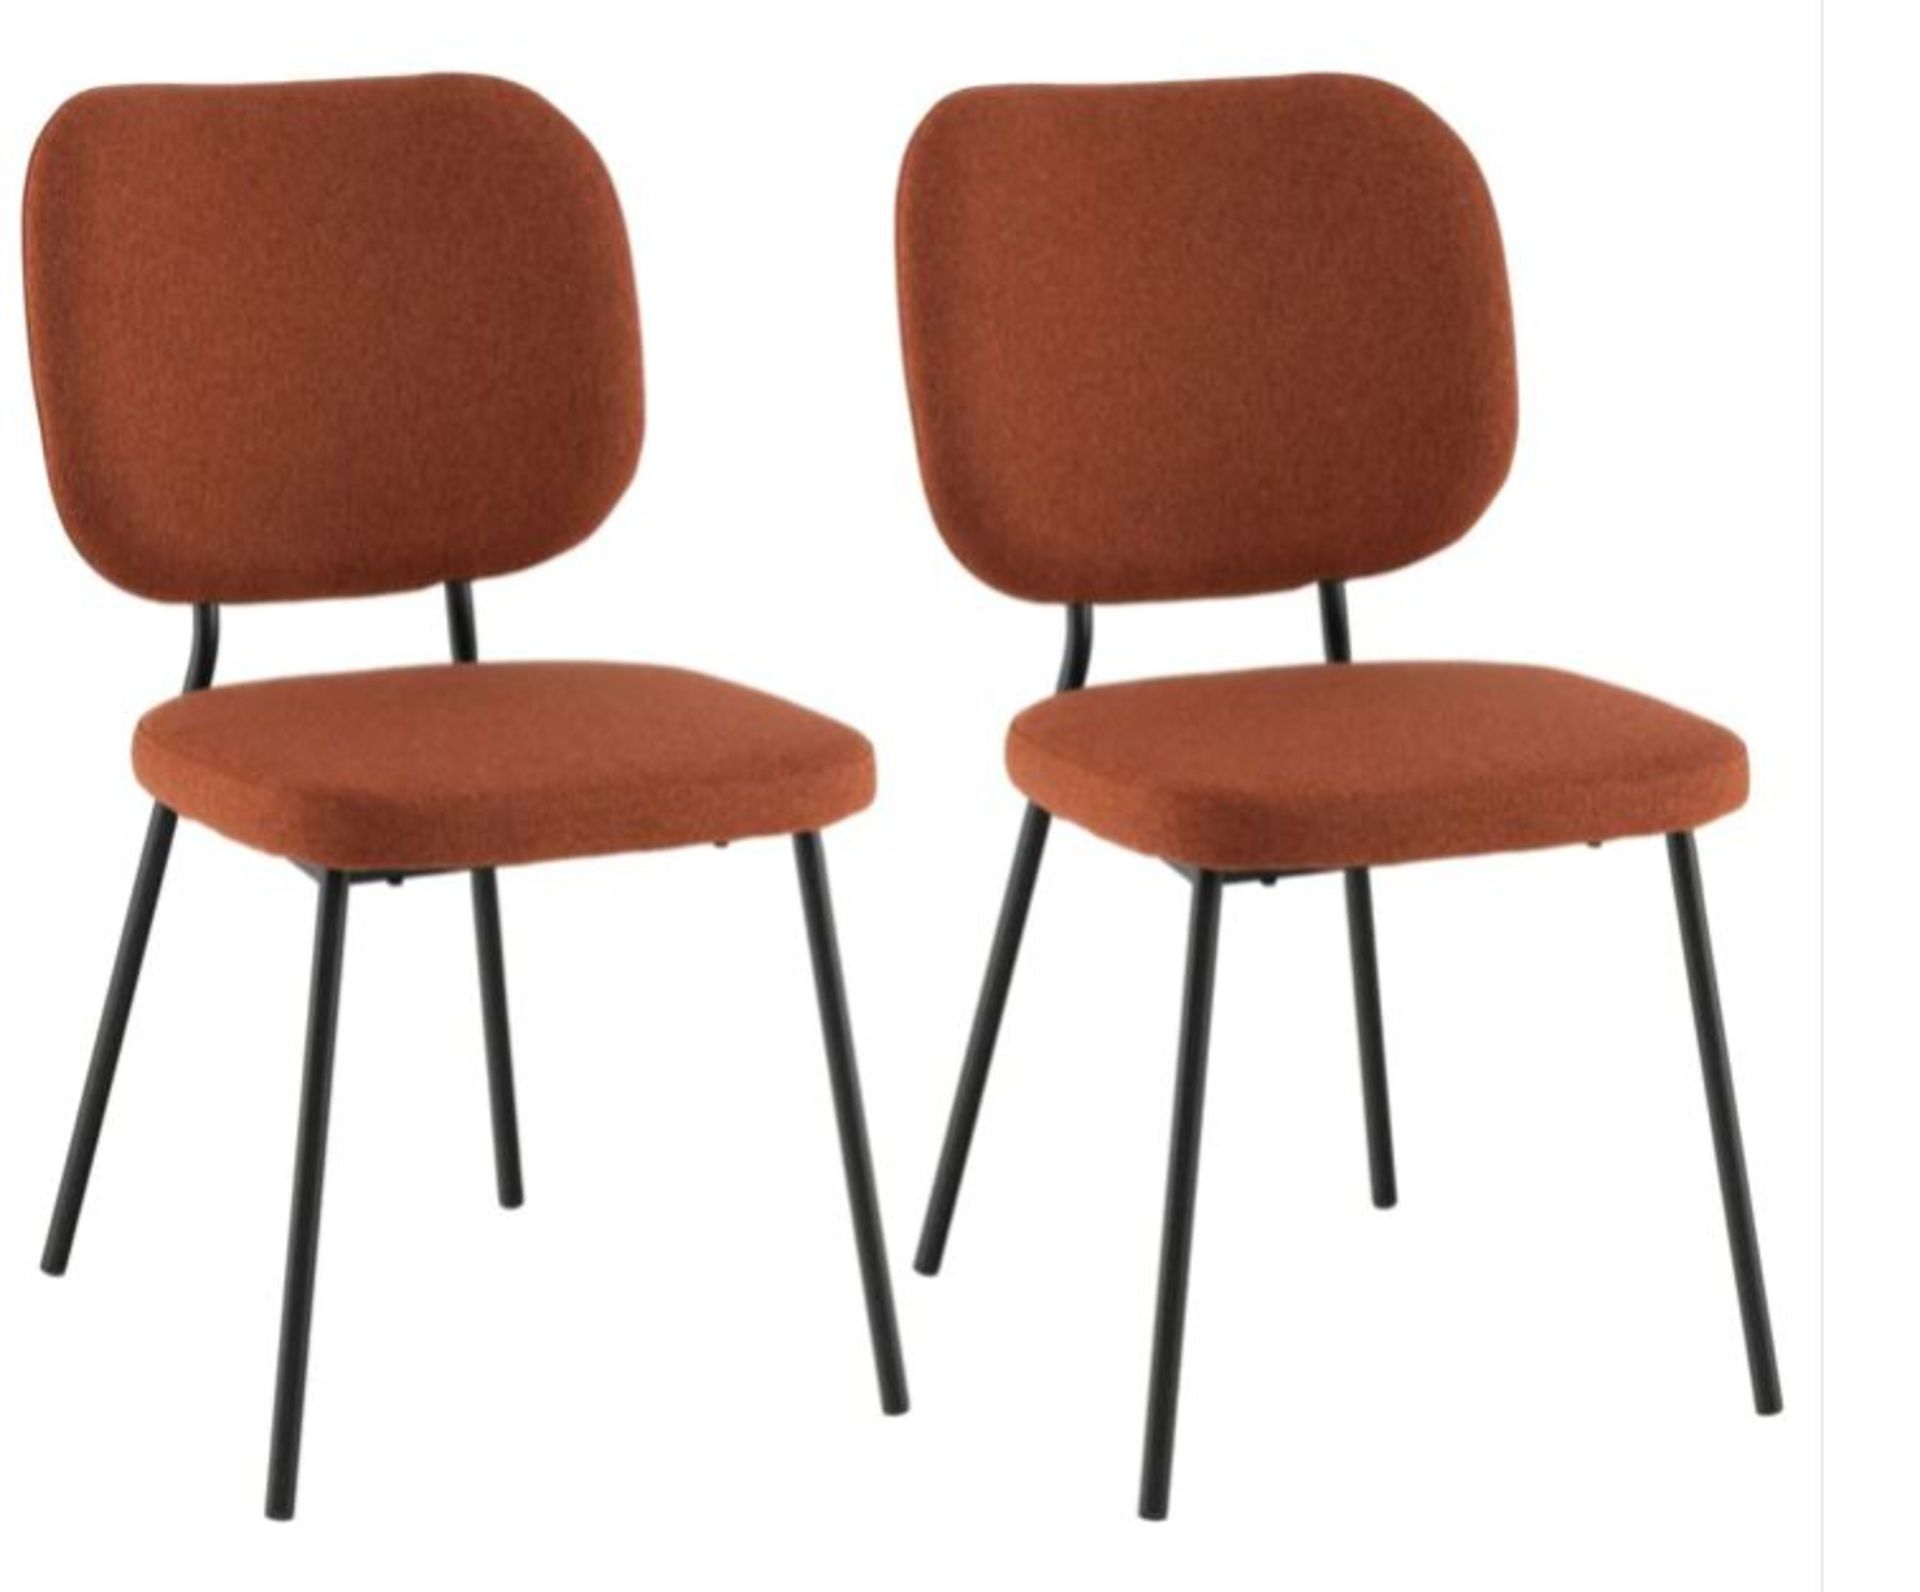 MODERN FABRIC DINING CHAIR SET OF 2 WITH LINEN FABRIC-ORANGE. - ER53.